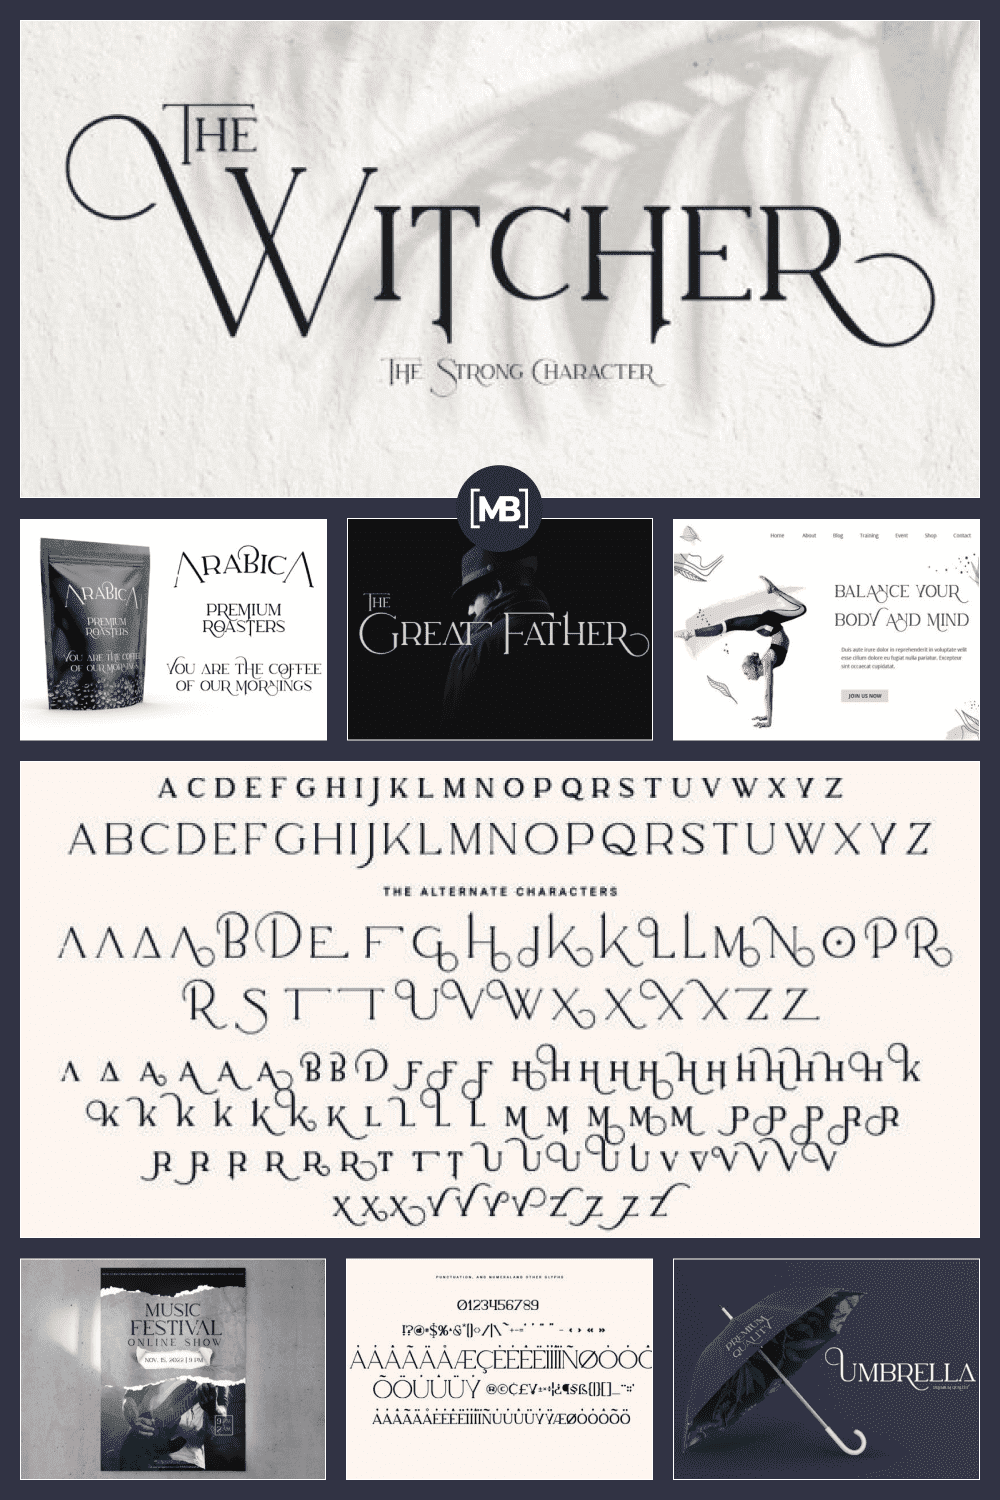 The Witcher Font.